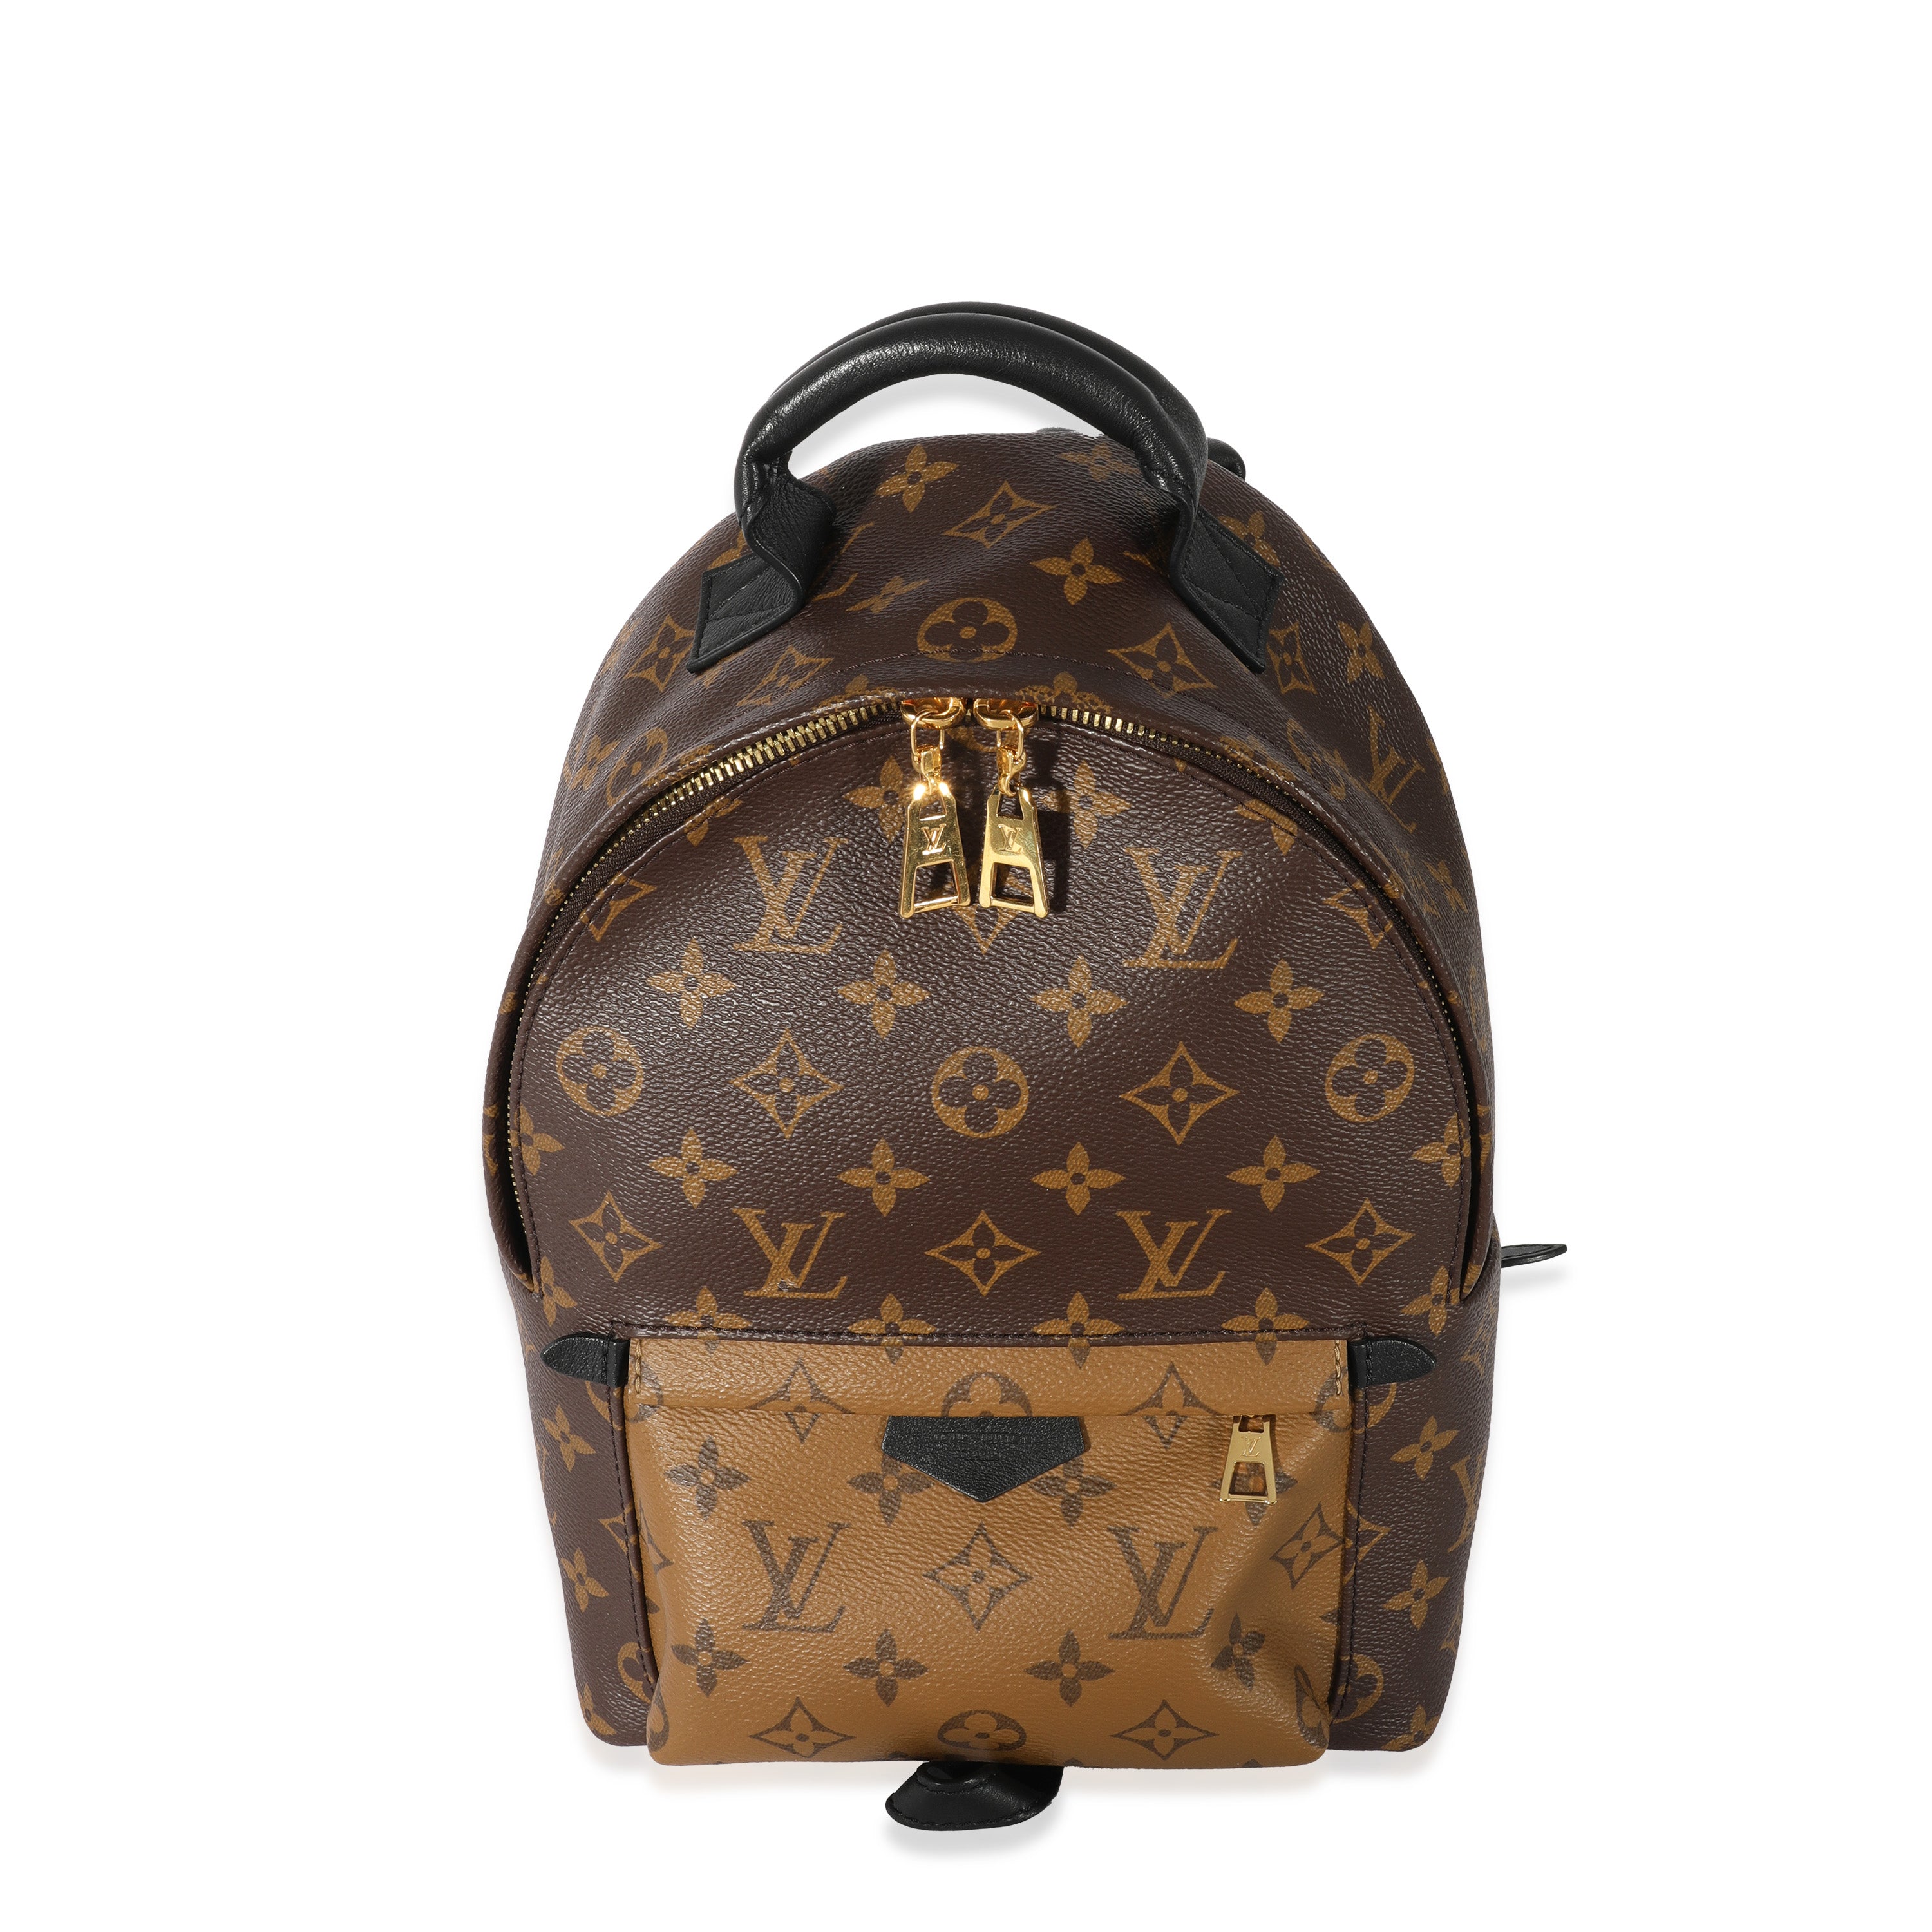 Authenticated Used LOUIS VUITTON Louis Vuitton Palm Springs